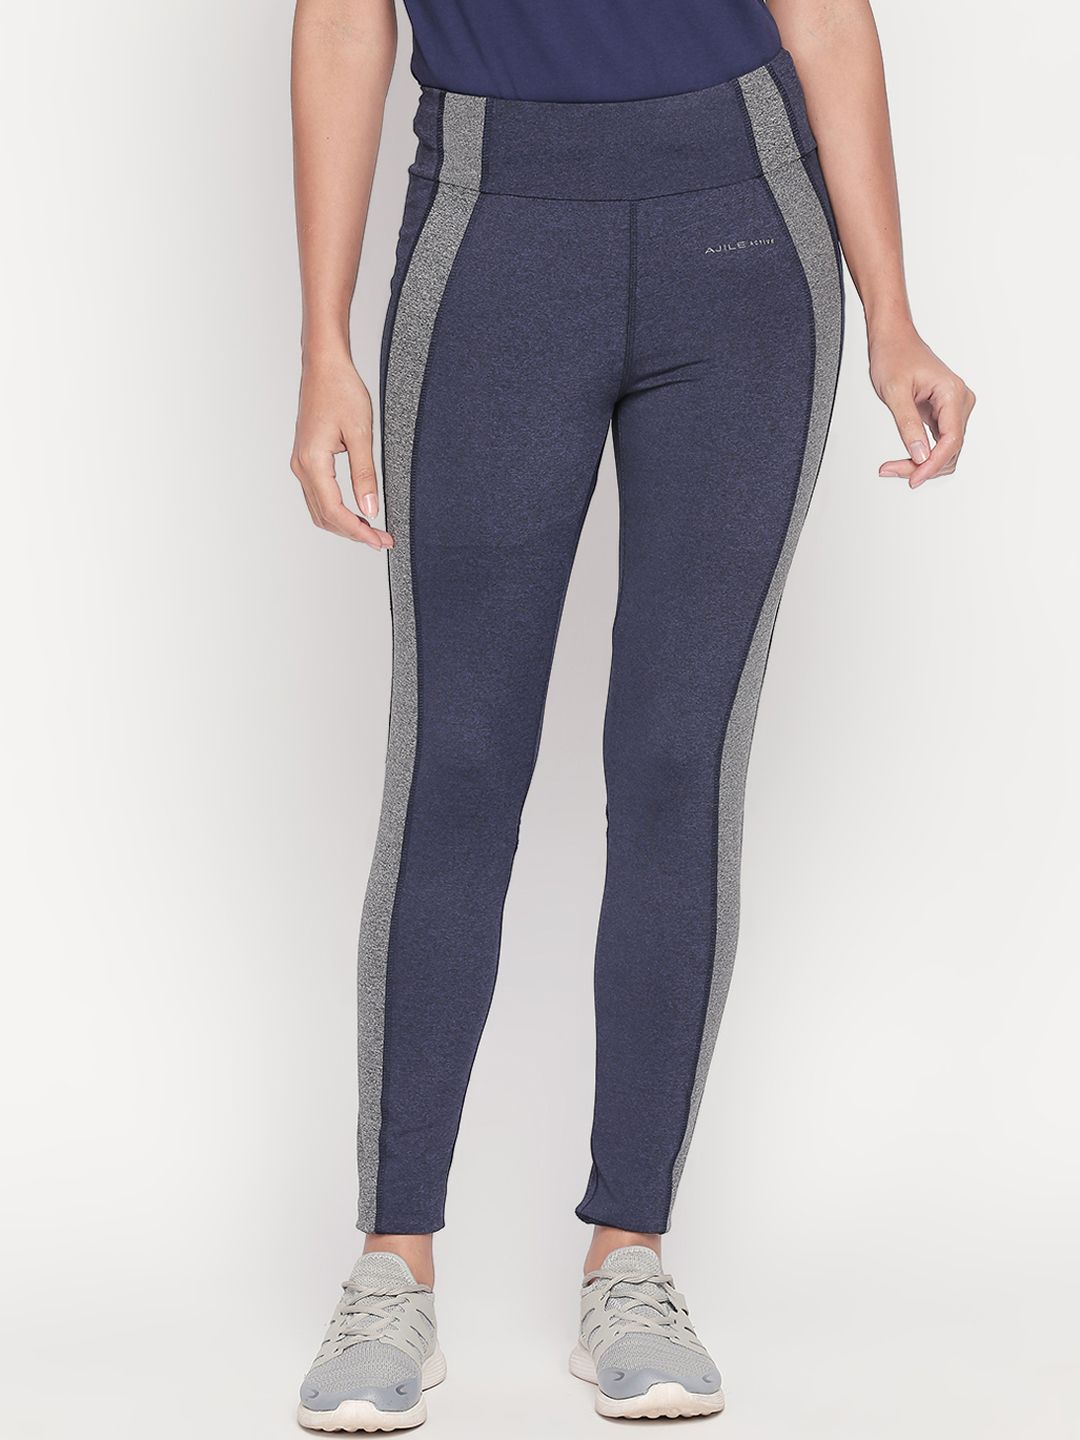 Ajile Women Navy Blue & Grey Colourblocked Slim Fit Track Pants Price in India